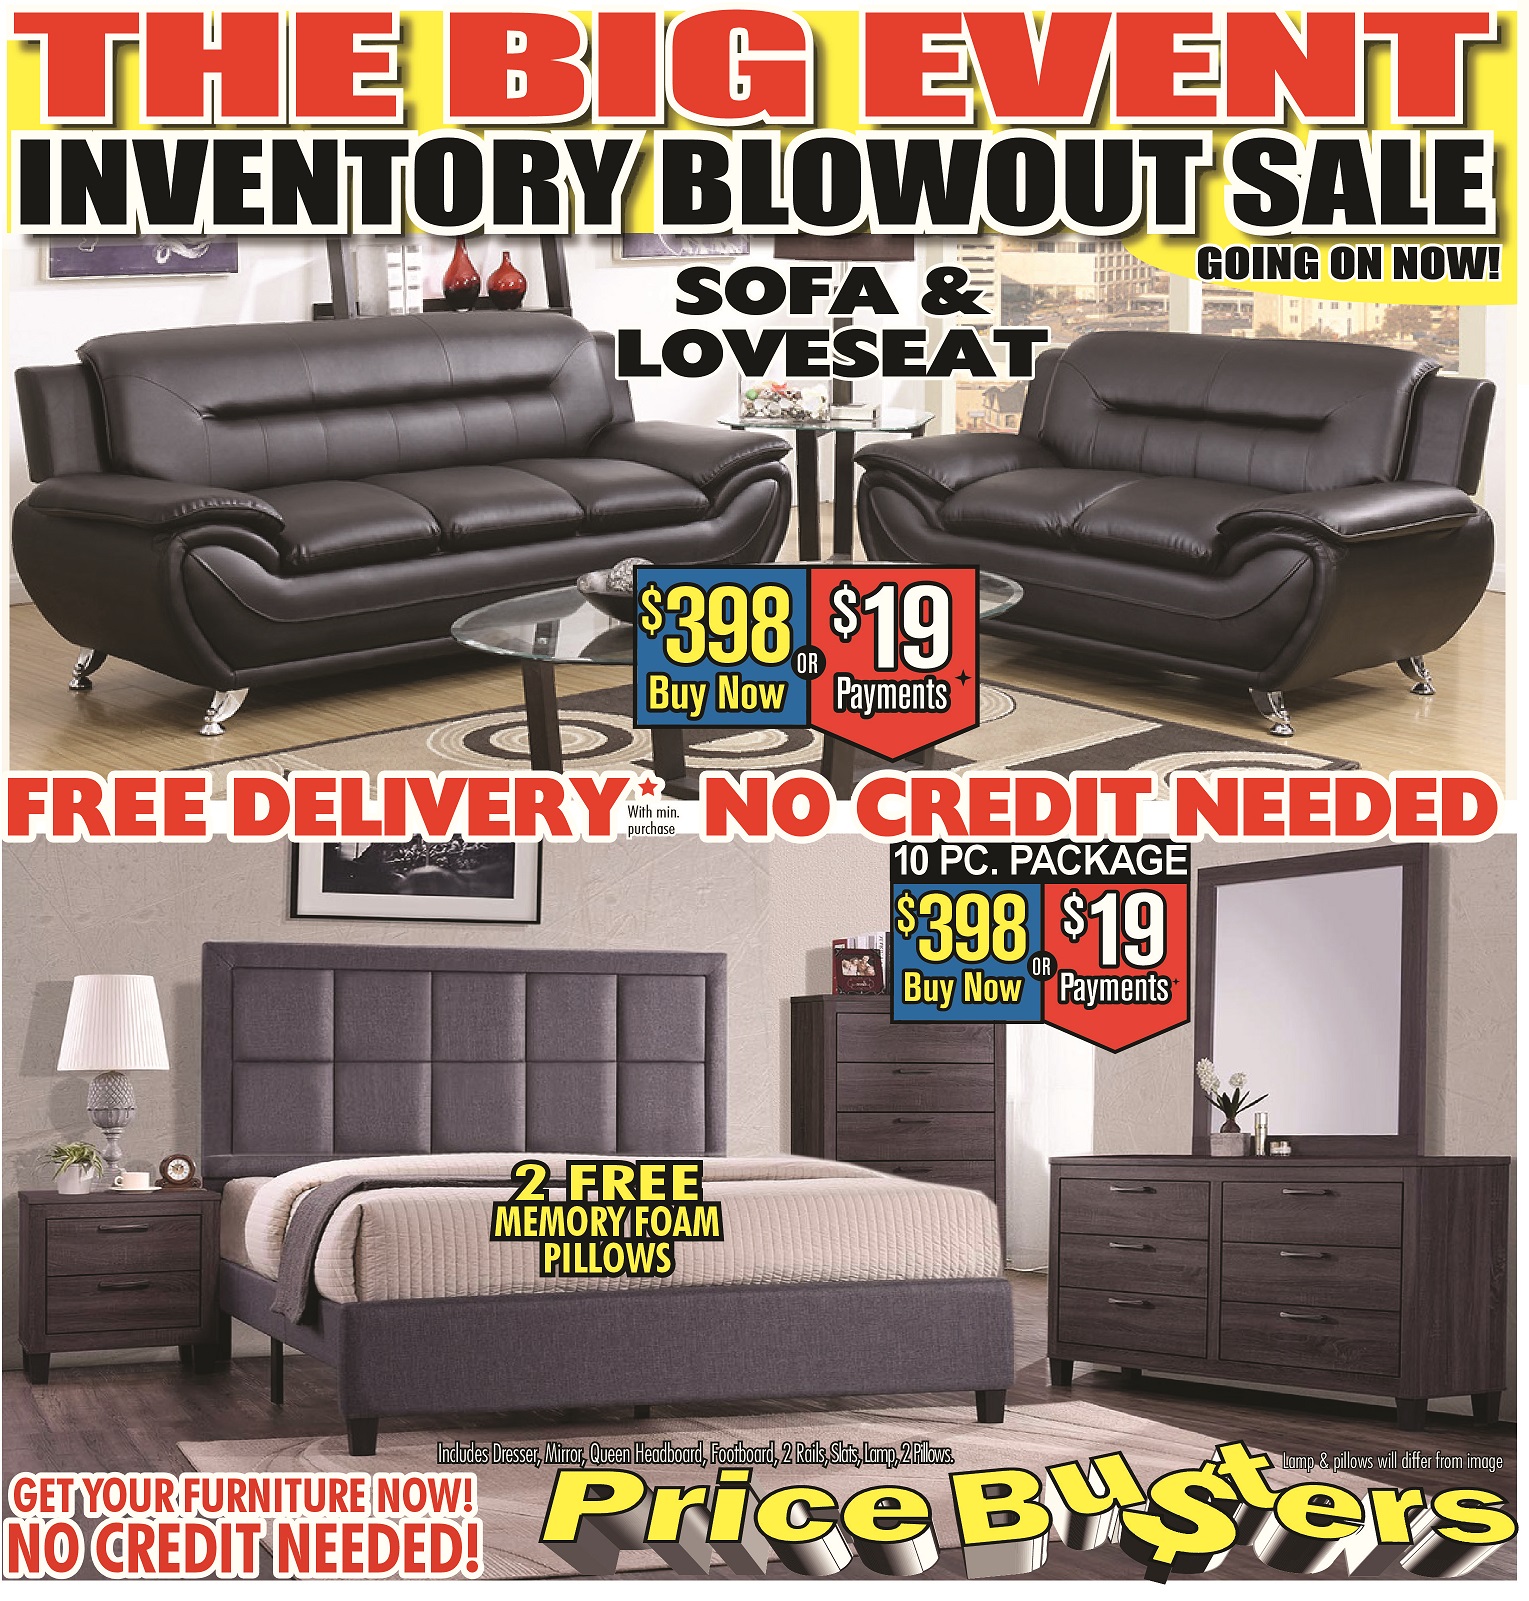 Price Busters Discount Furniture 2101 University Blvd E